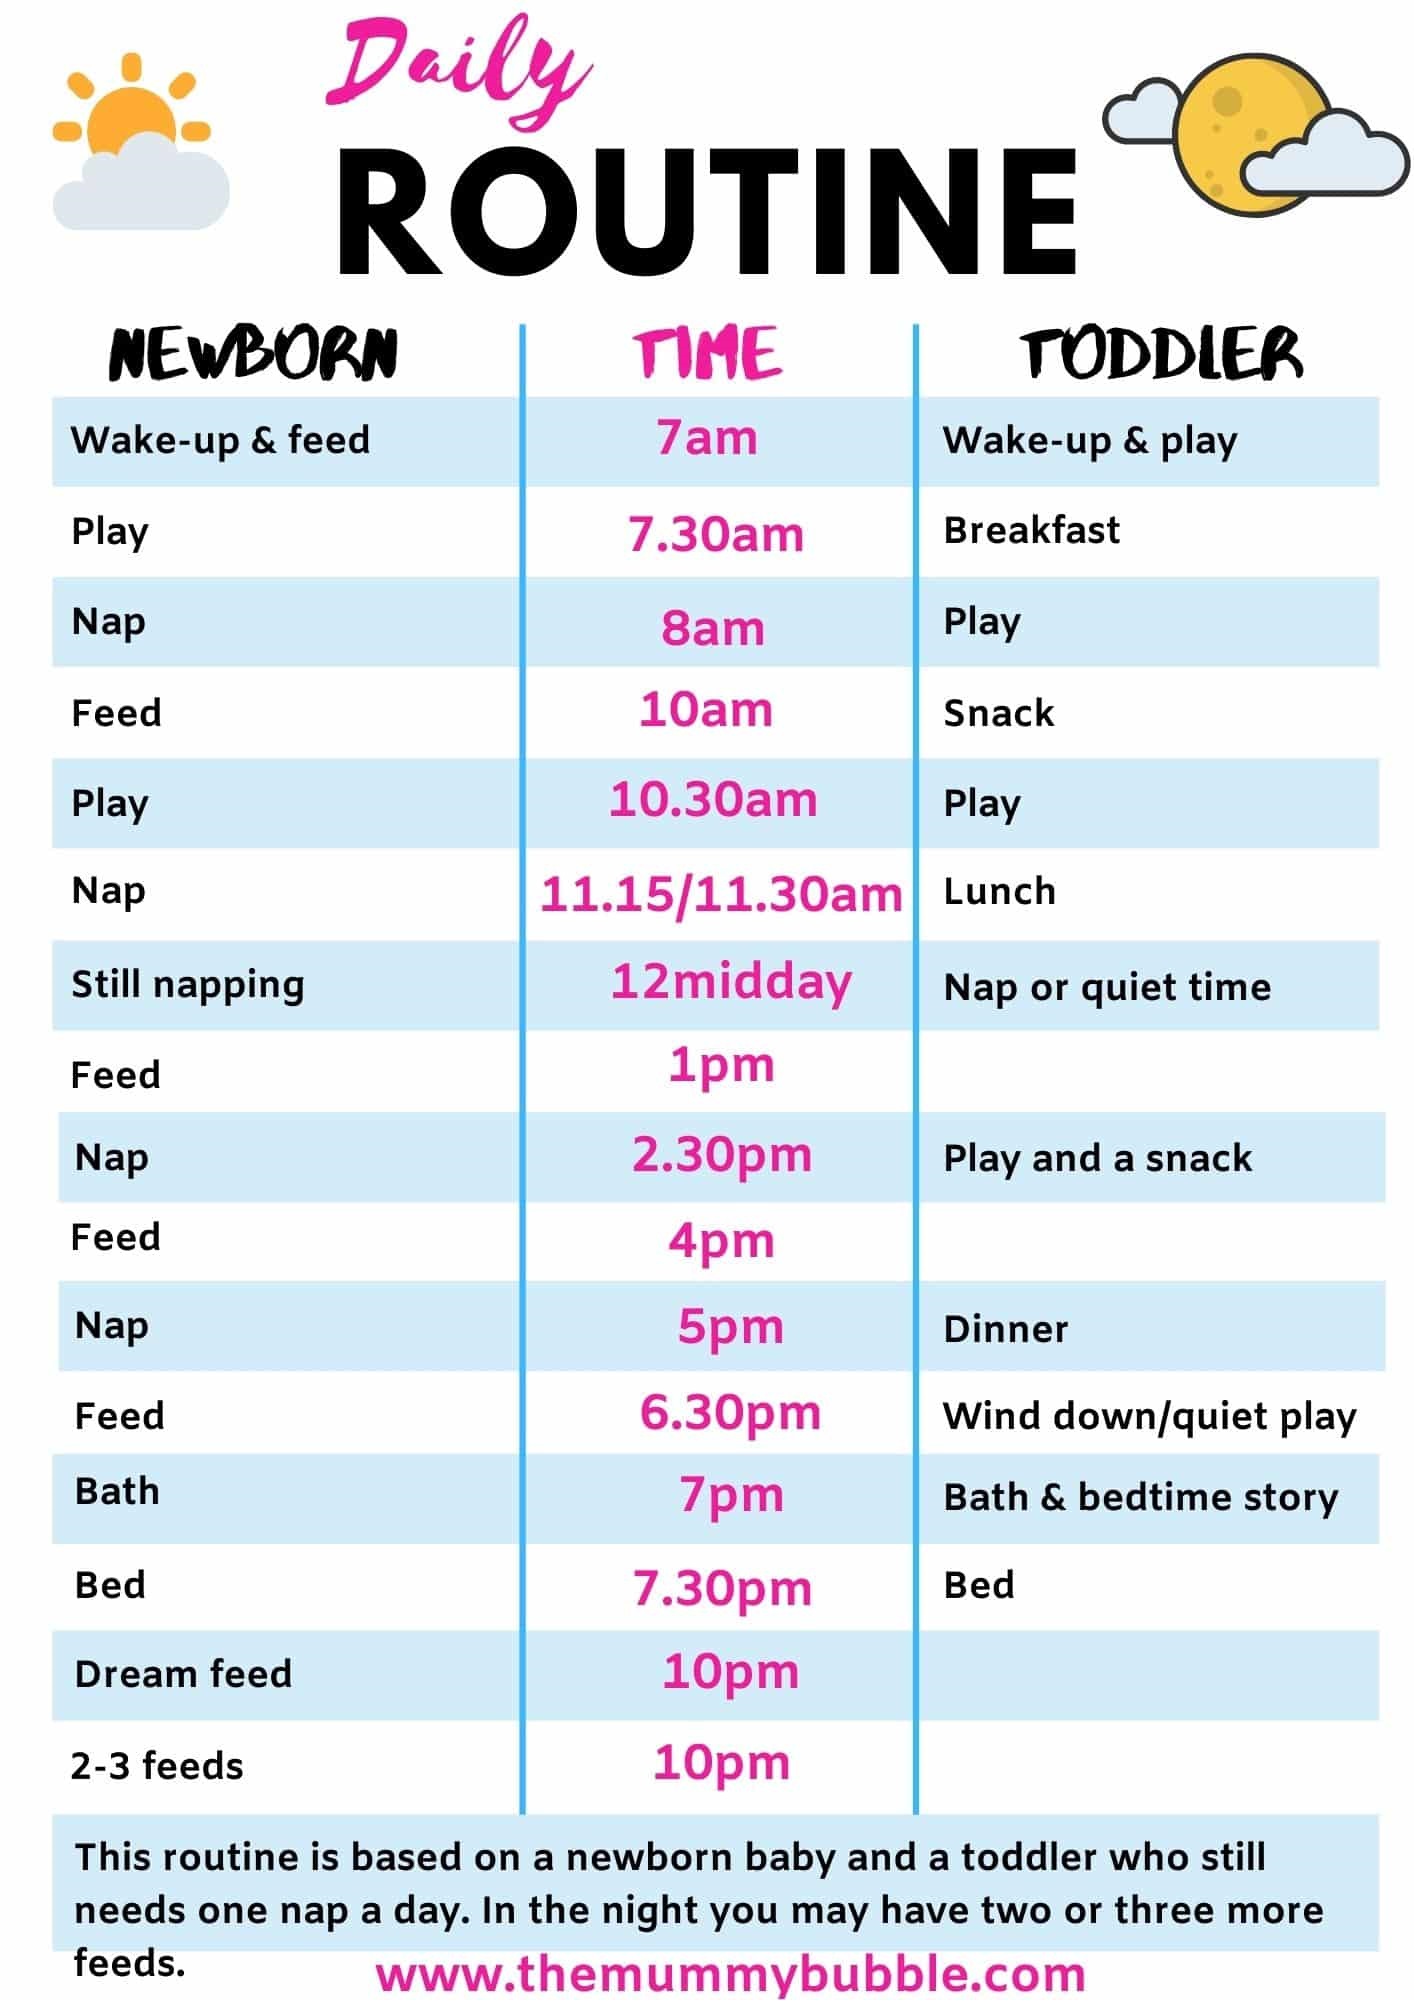 daily schedule for infants and toddlers